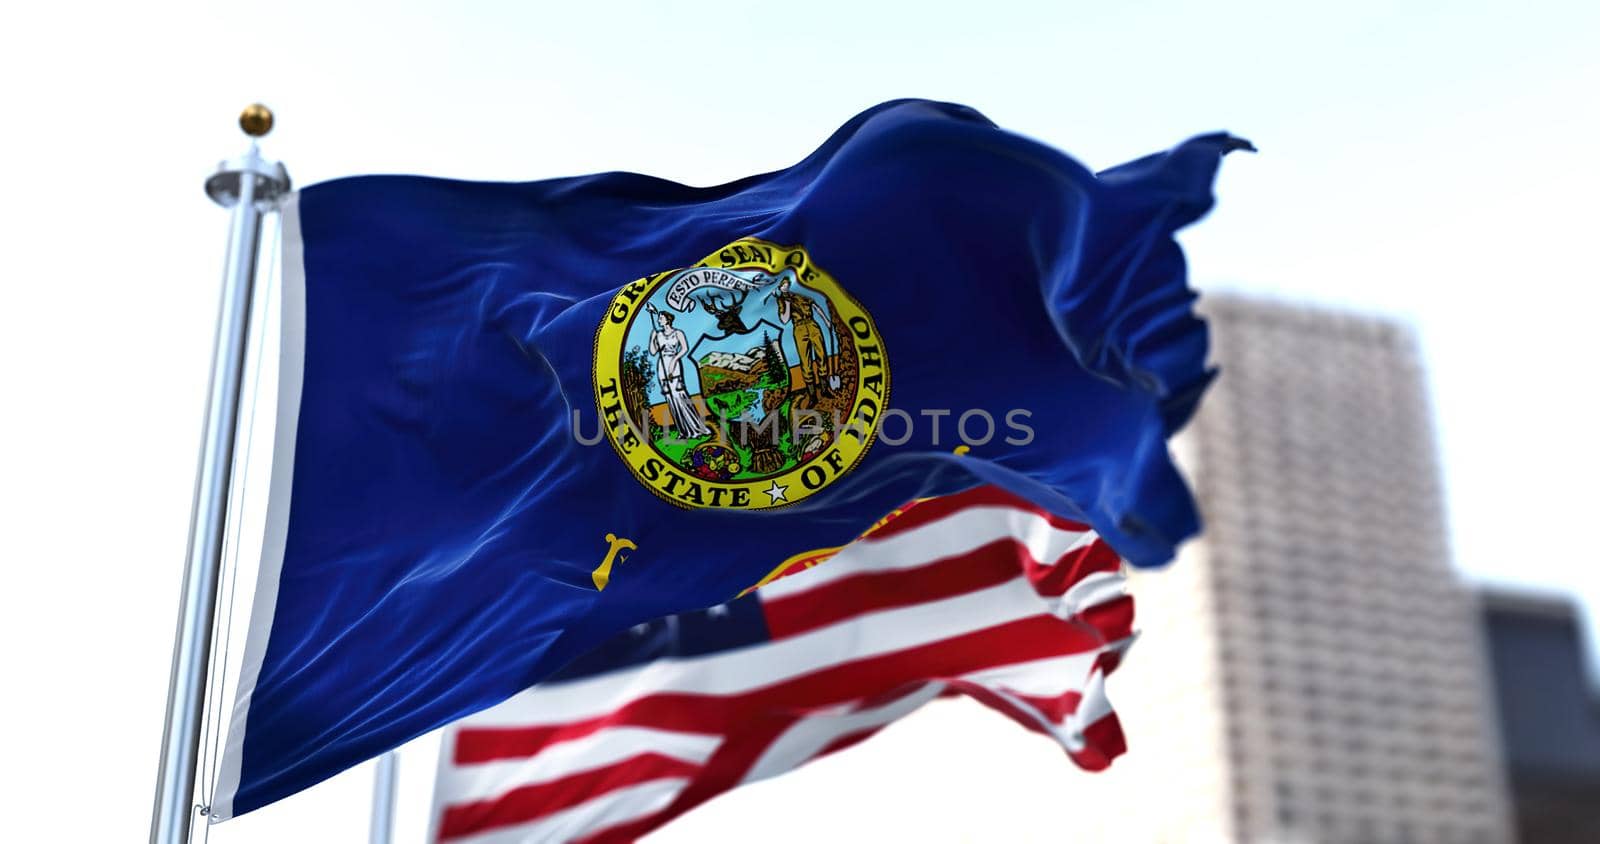 the flag of the US state of Idaho waving in the wind with the American stars and stripes flag blurred in the background. On July 3, 1890, Idaho became the 43rd state to join the Union